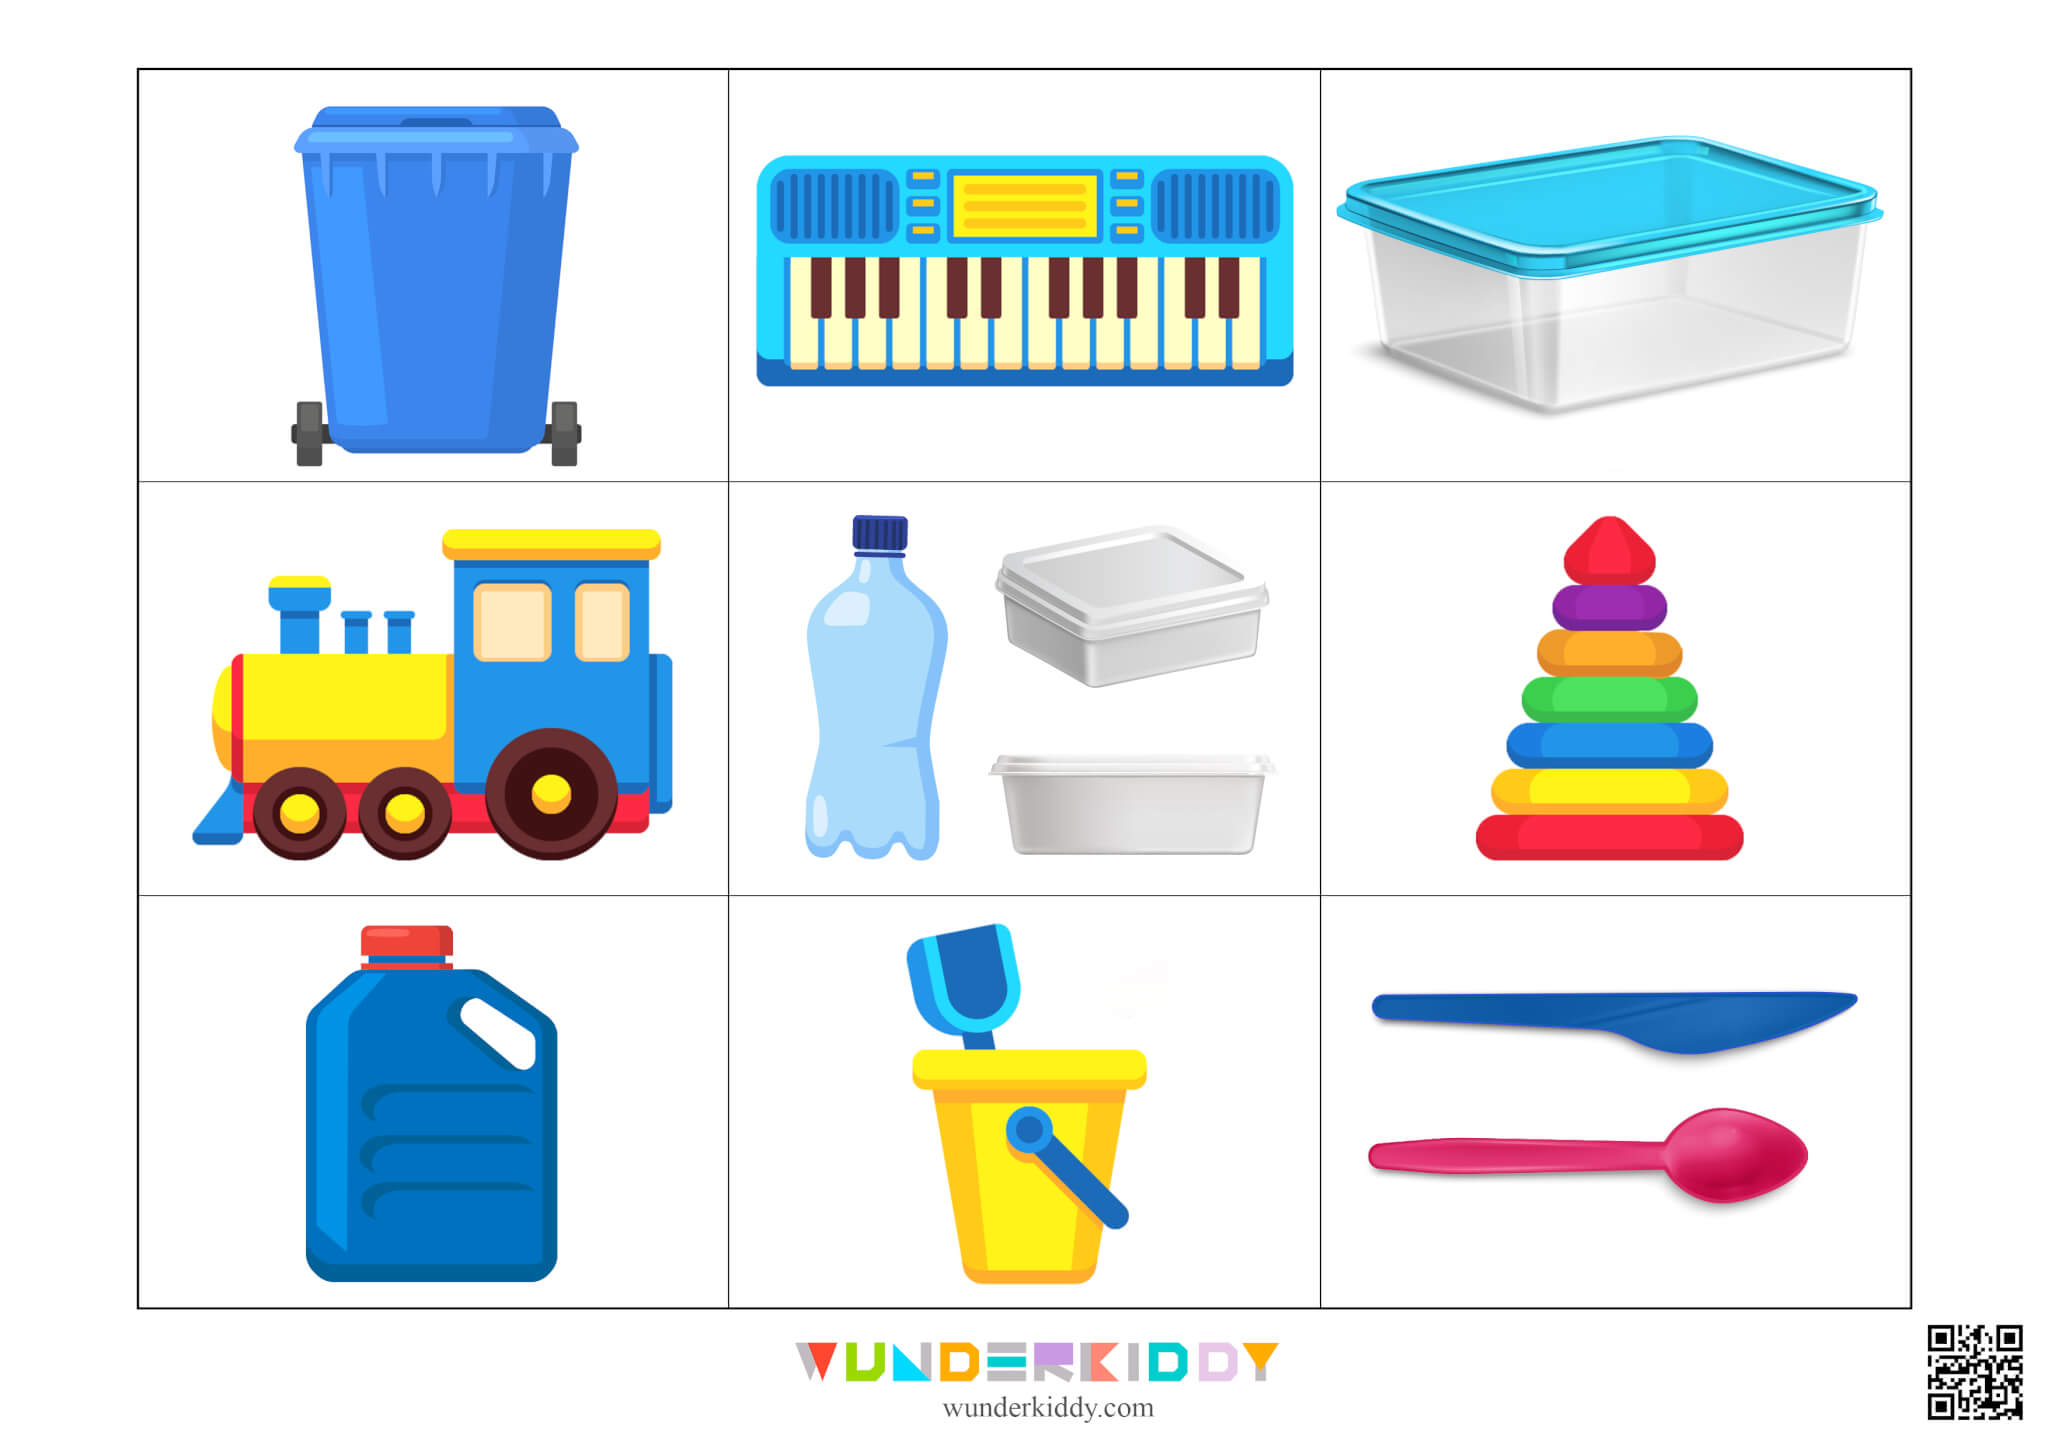 Kindergarten Sorting Activity Materials and Objects - Image 12